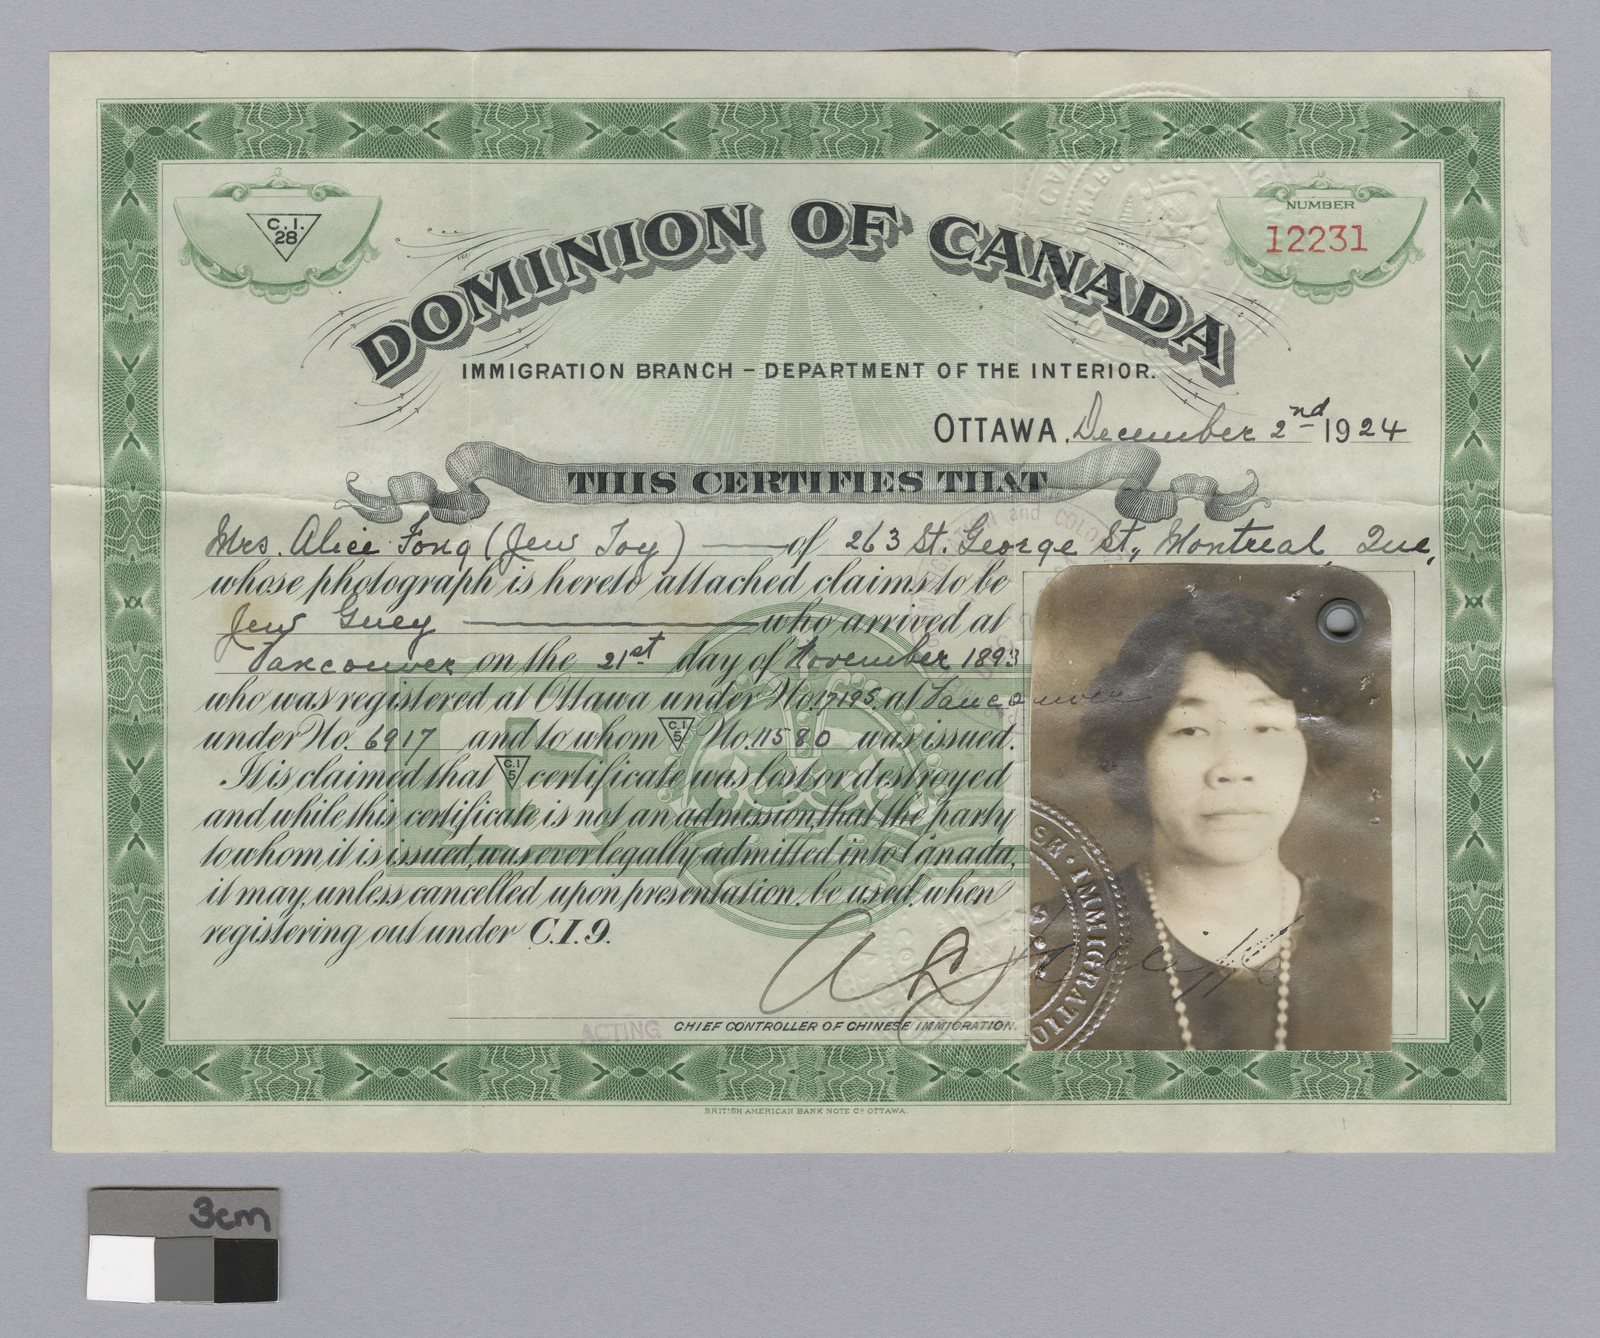 Department of Immigration and Colonization certificate for Alice Fong